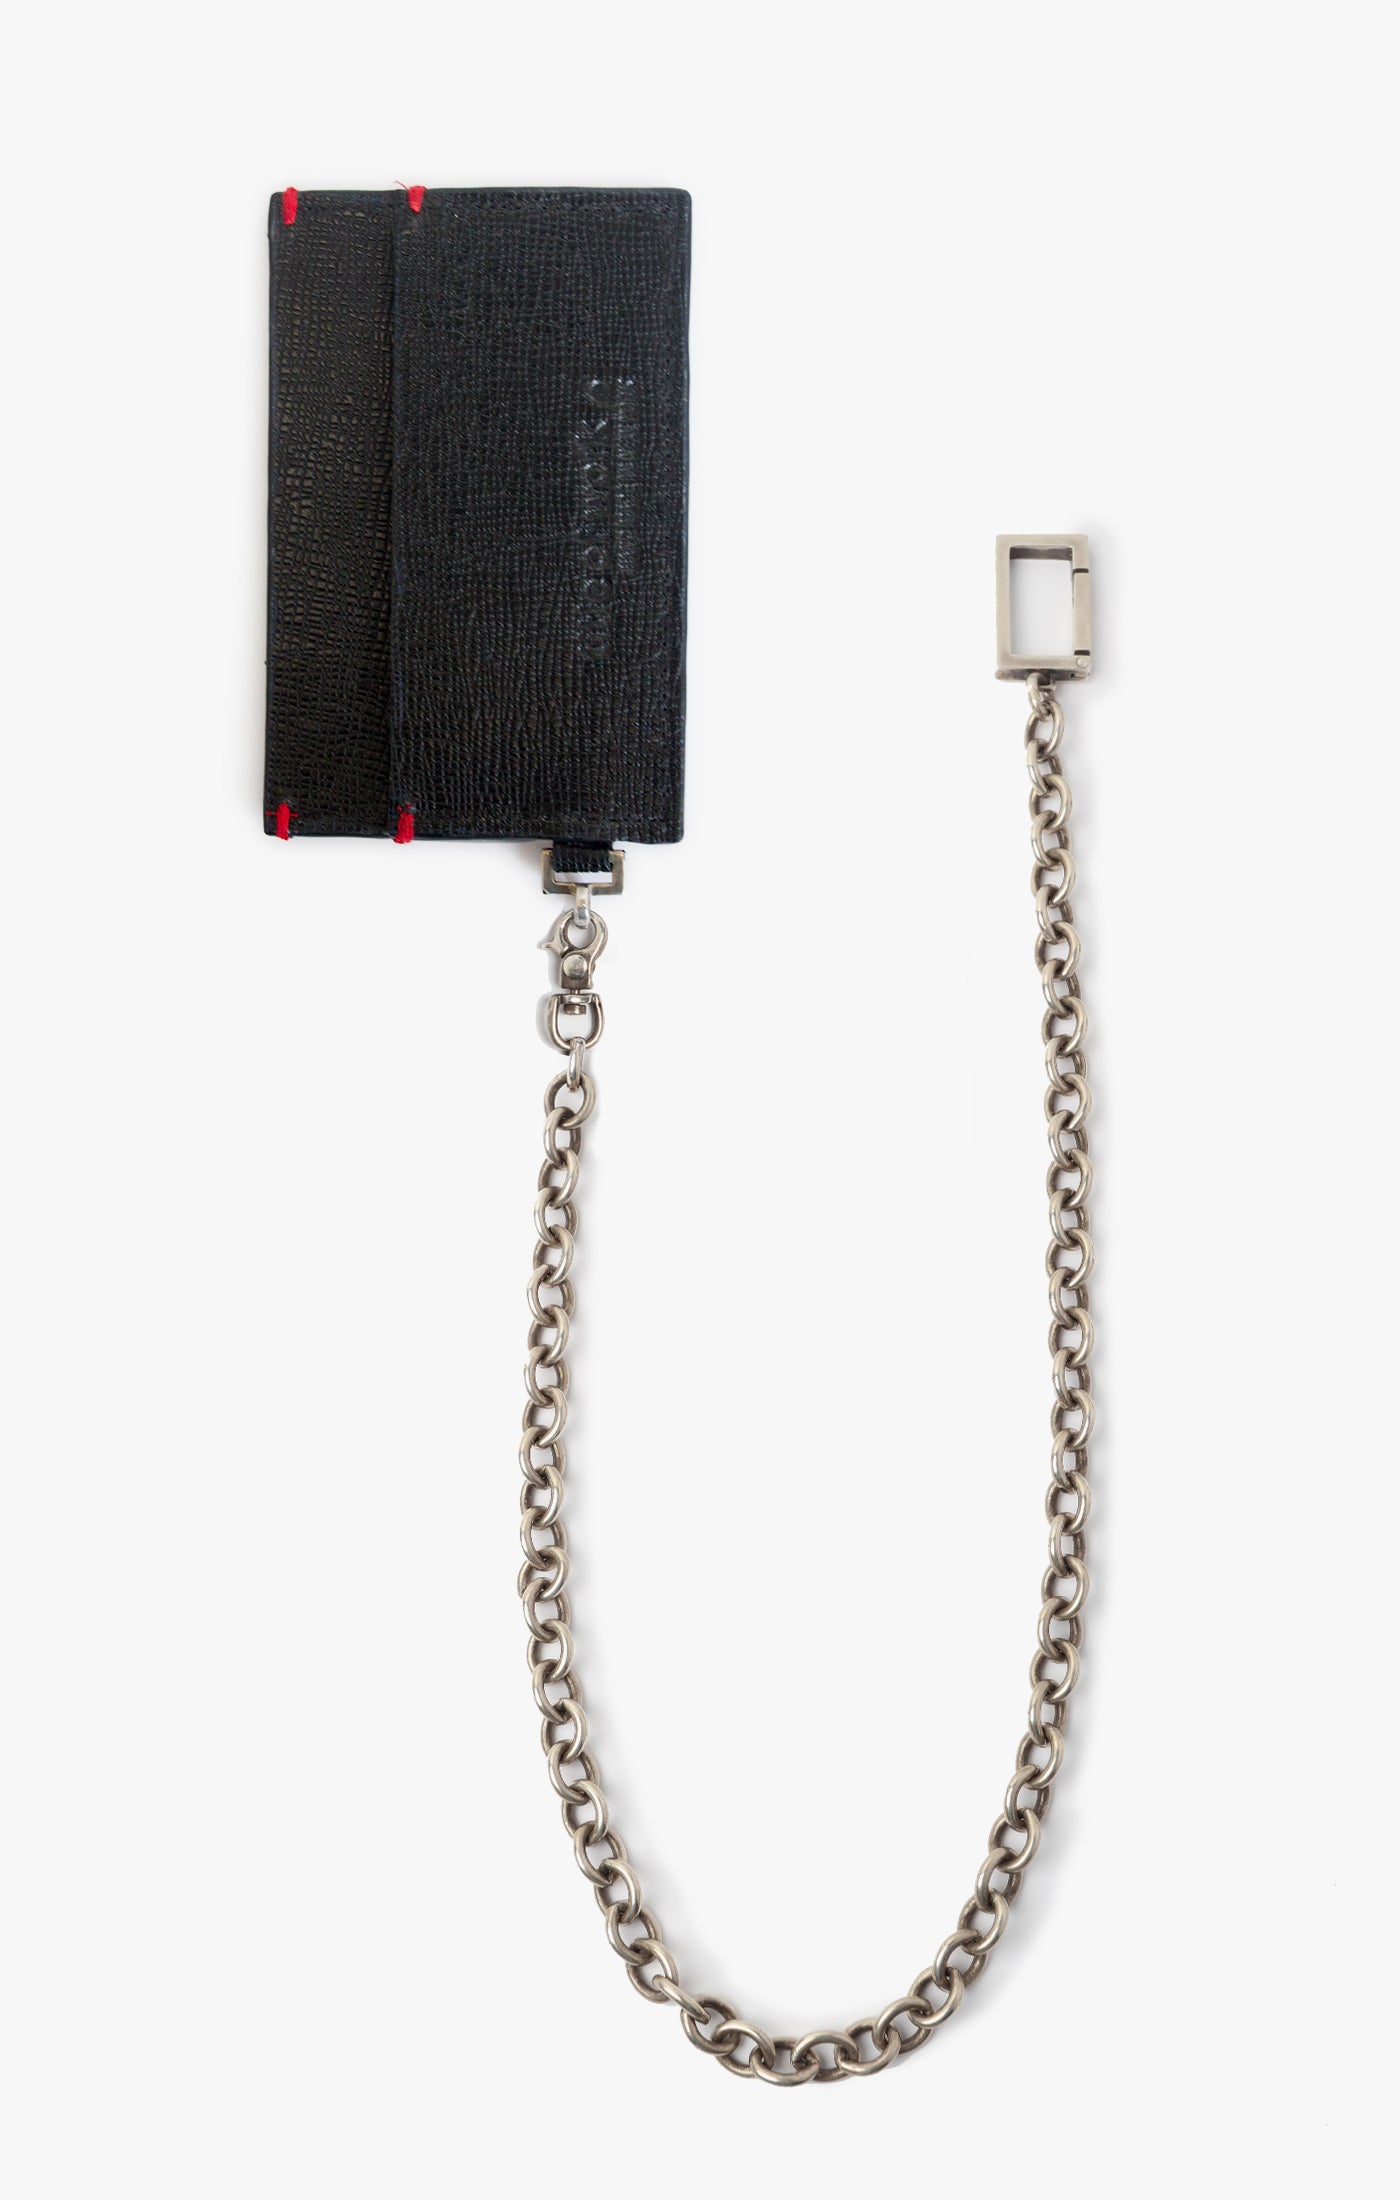 3 POCKET CARD HOLDER W/ CABLE CHAIN